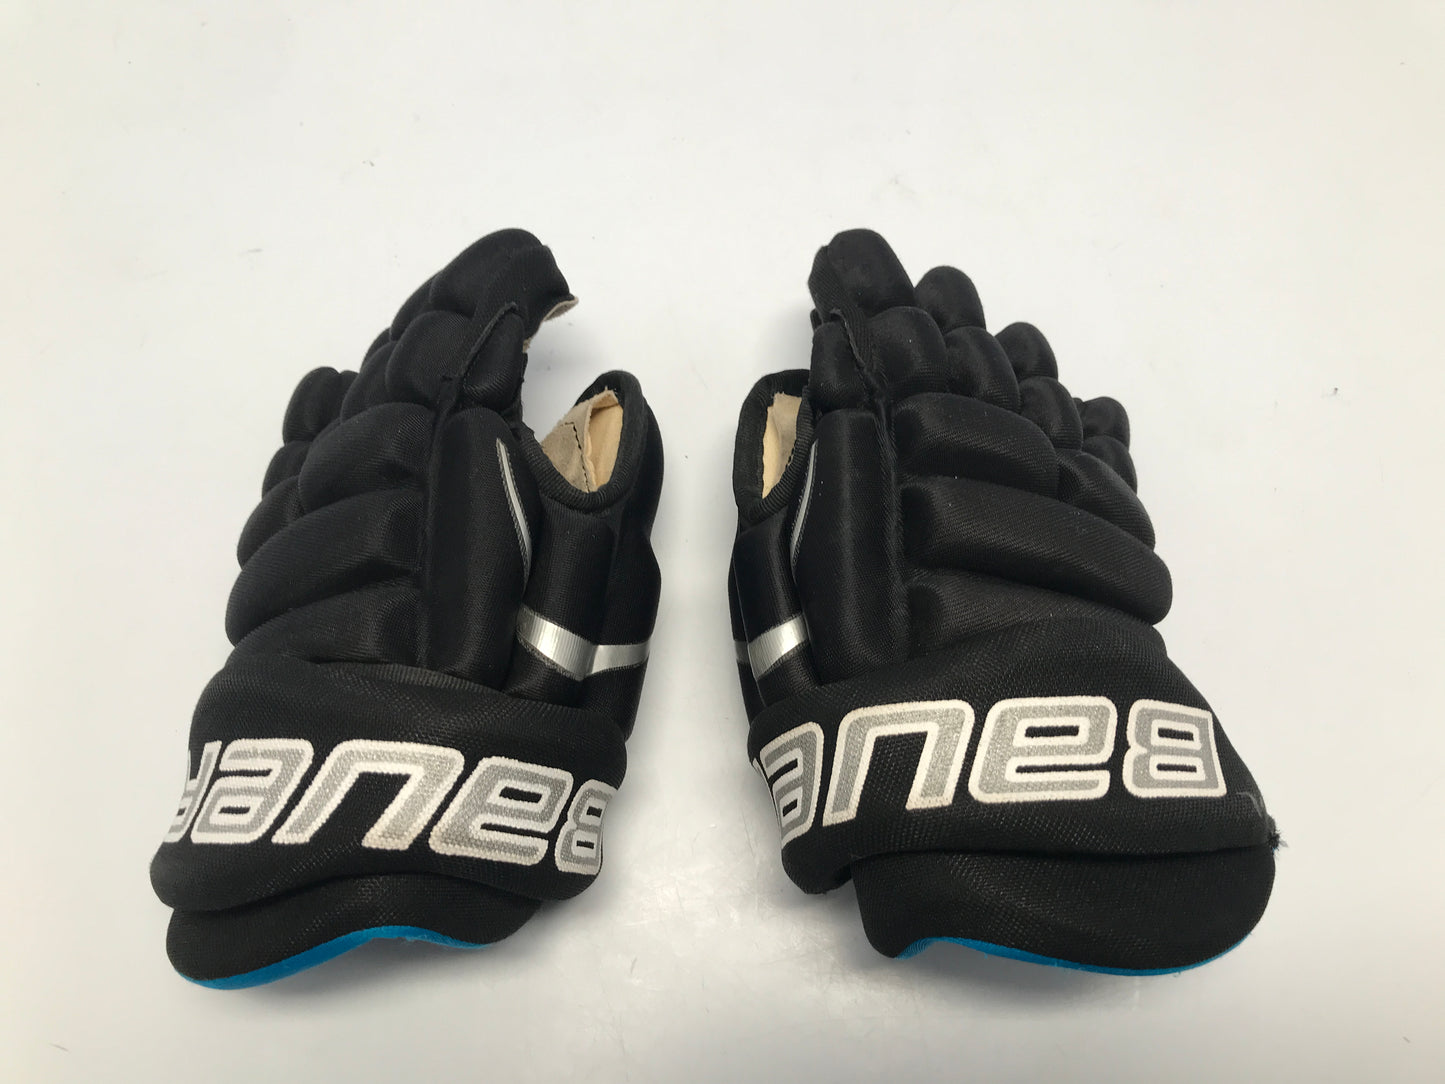 Hockey Gloves Child Size Youth 9 inch Bauer Soft Leather Palms Age 5-6 Black Blue Like New